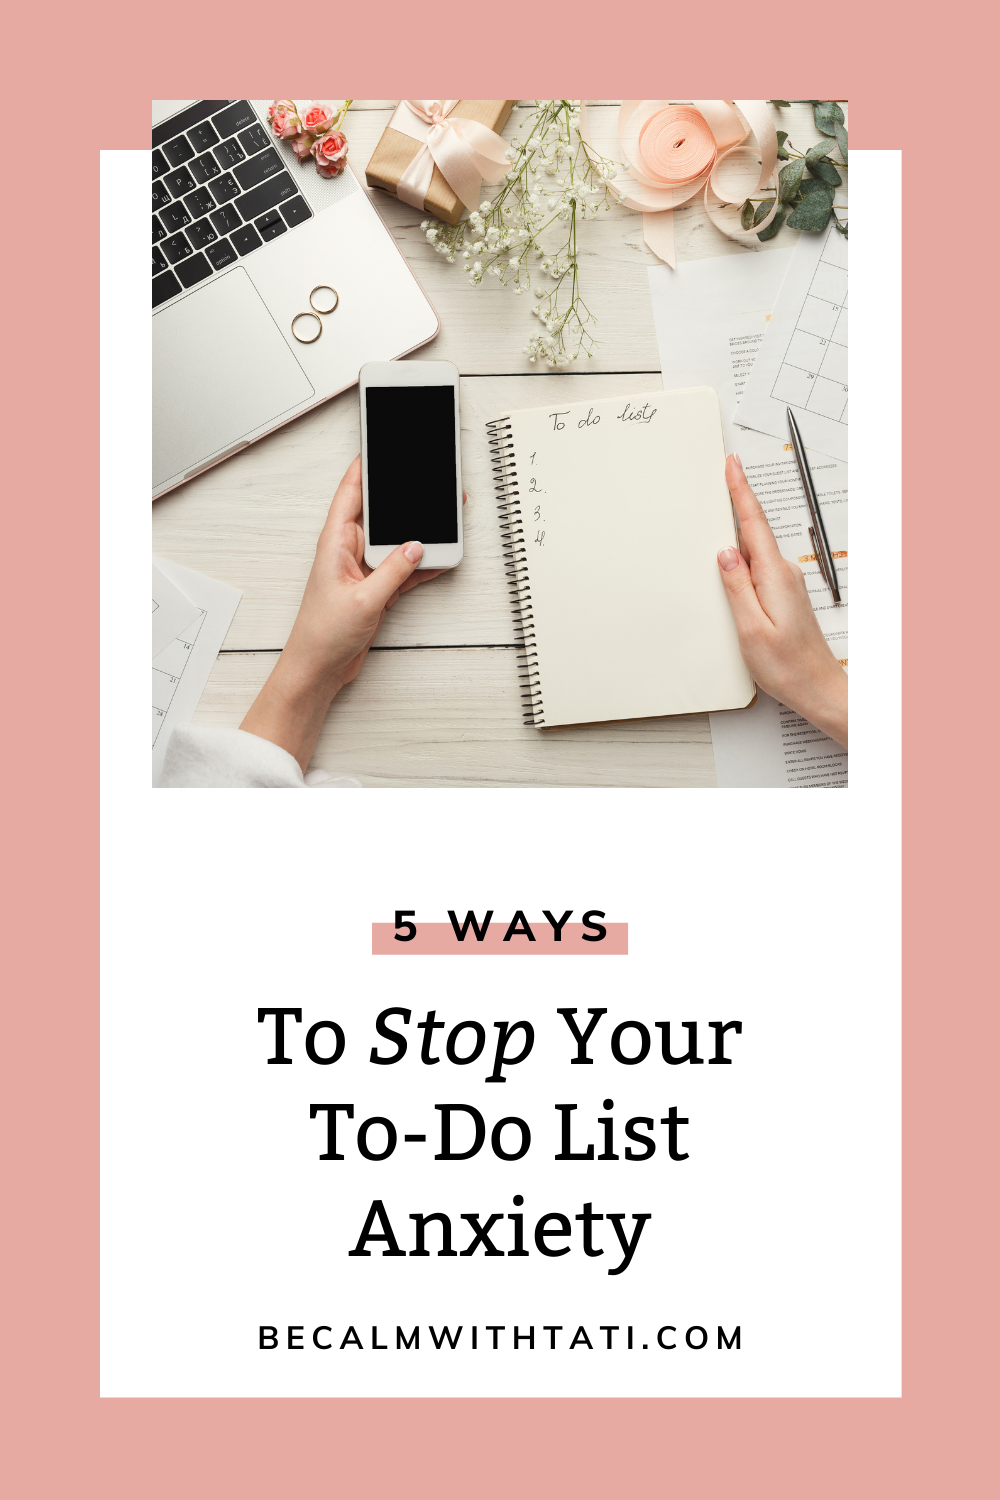 5 Ways To Stop Your To-Do List Anxiety